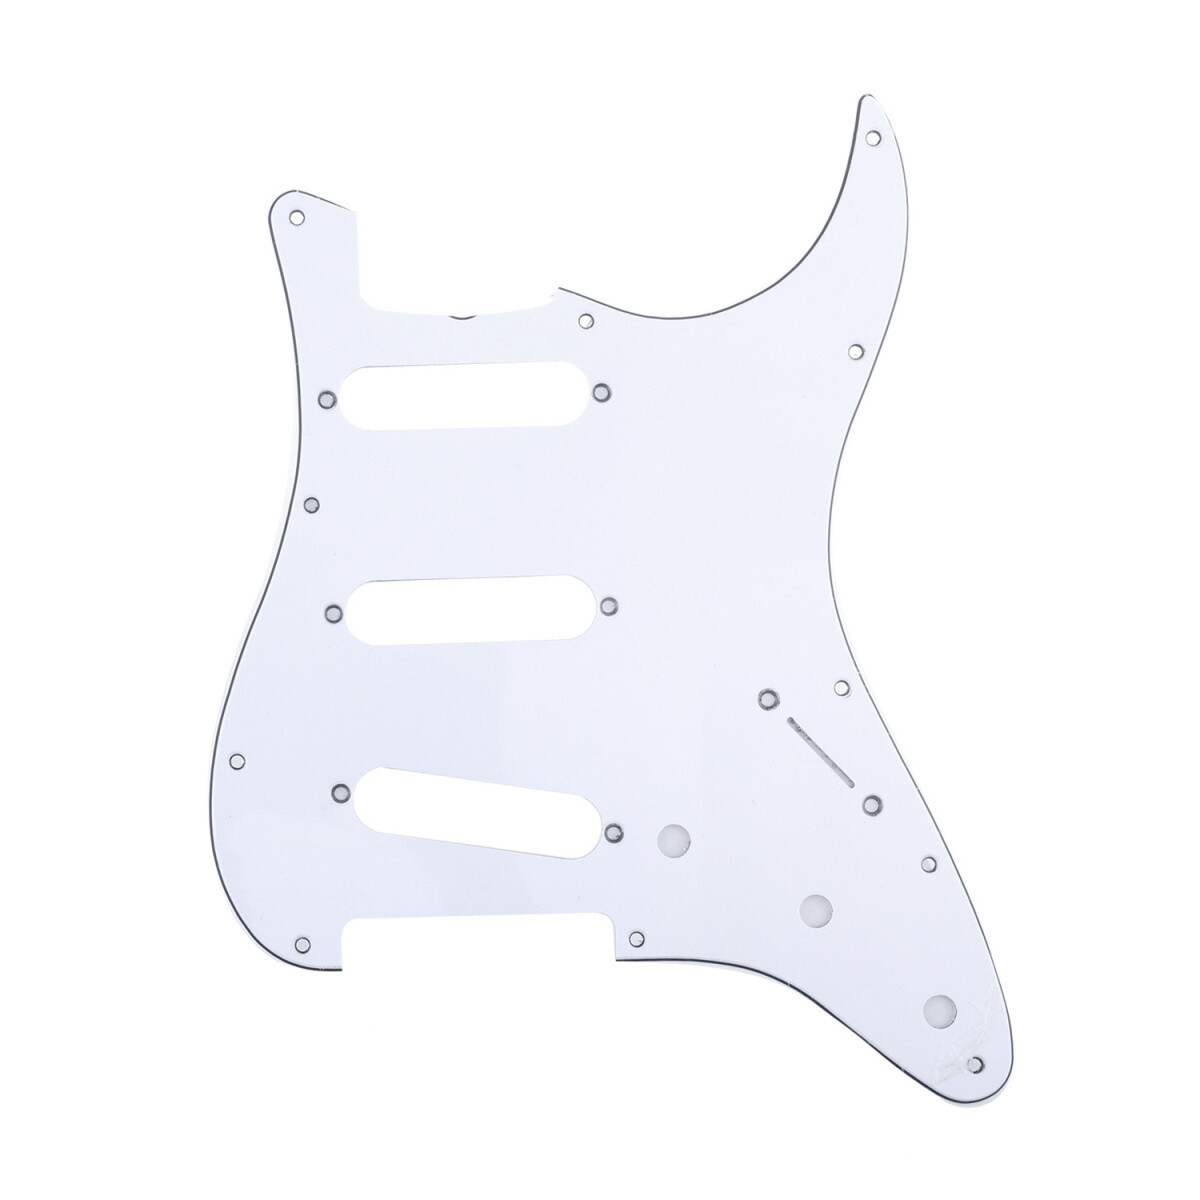 Brio SSS Strat® Pickguard 11-Hole 62 Vintage Style American Stratocaster 62, 3 Ply White